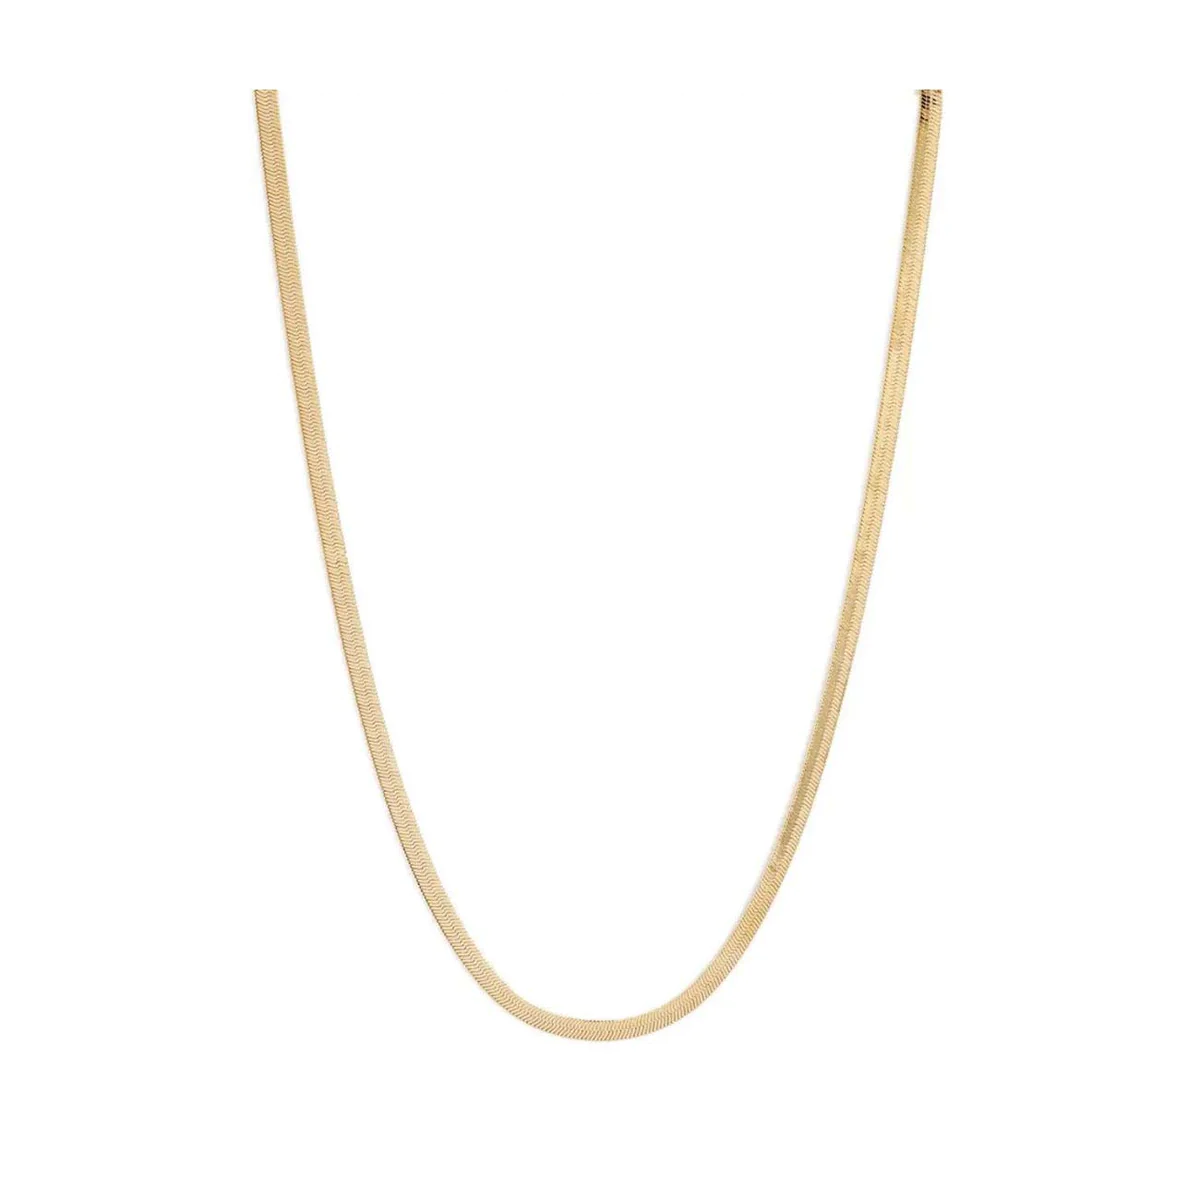 Skinny Monte Carlo Necklace- Gold Plated